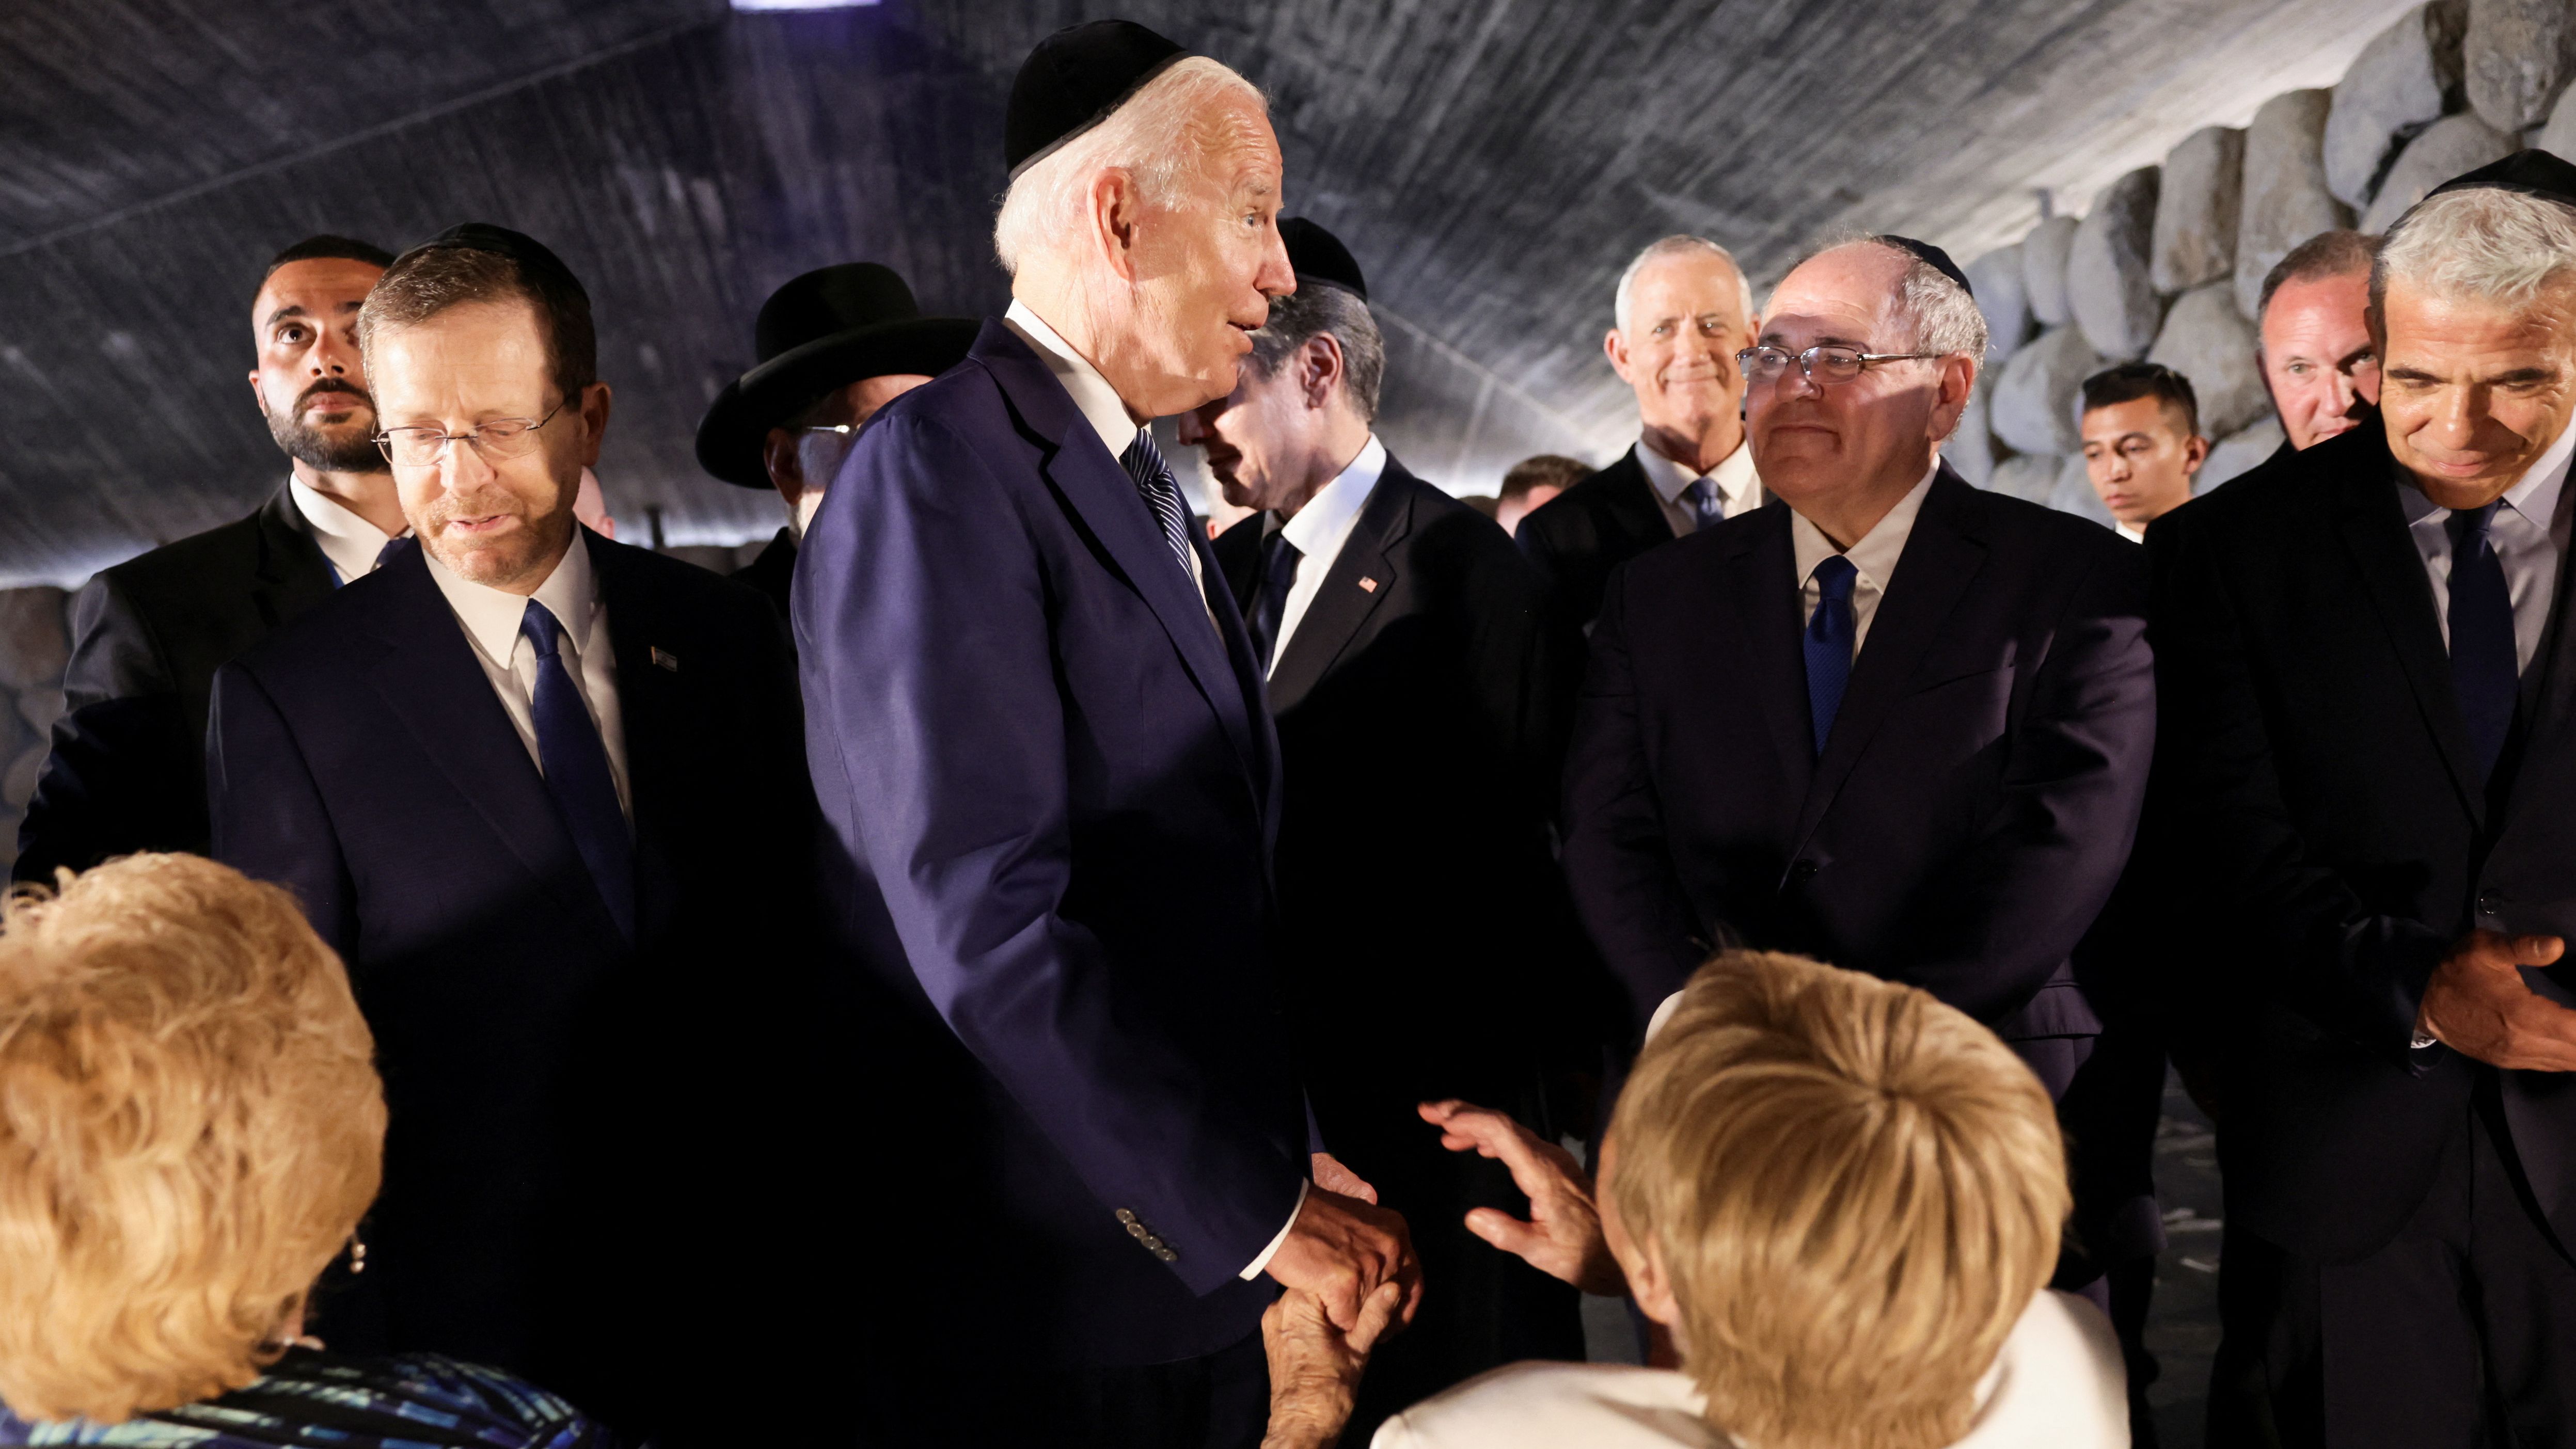 Biden meets with Holocaust survivors during his visit to Yad Vashem on Wednesday.